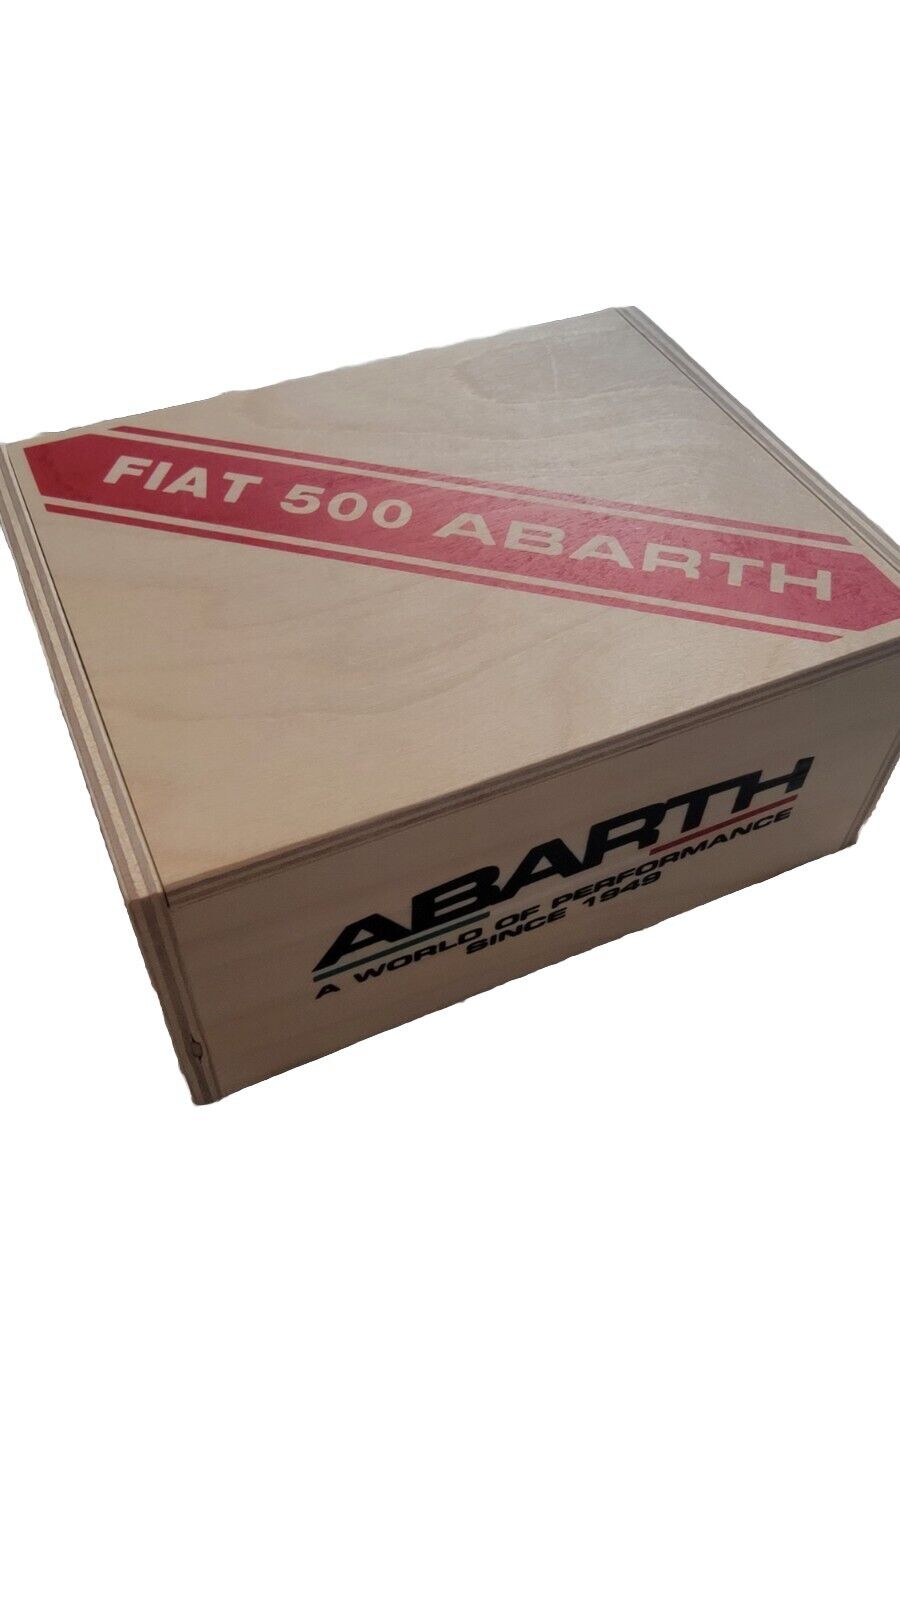 Fiat 500 Abarth Press Kit - 190 Of 200 - Extremely Rare